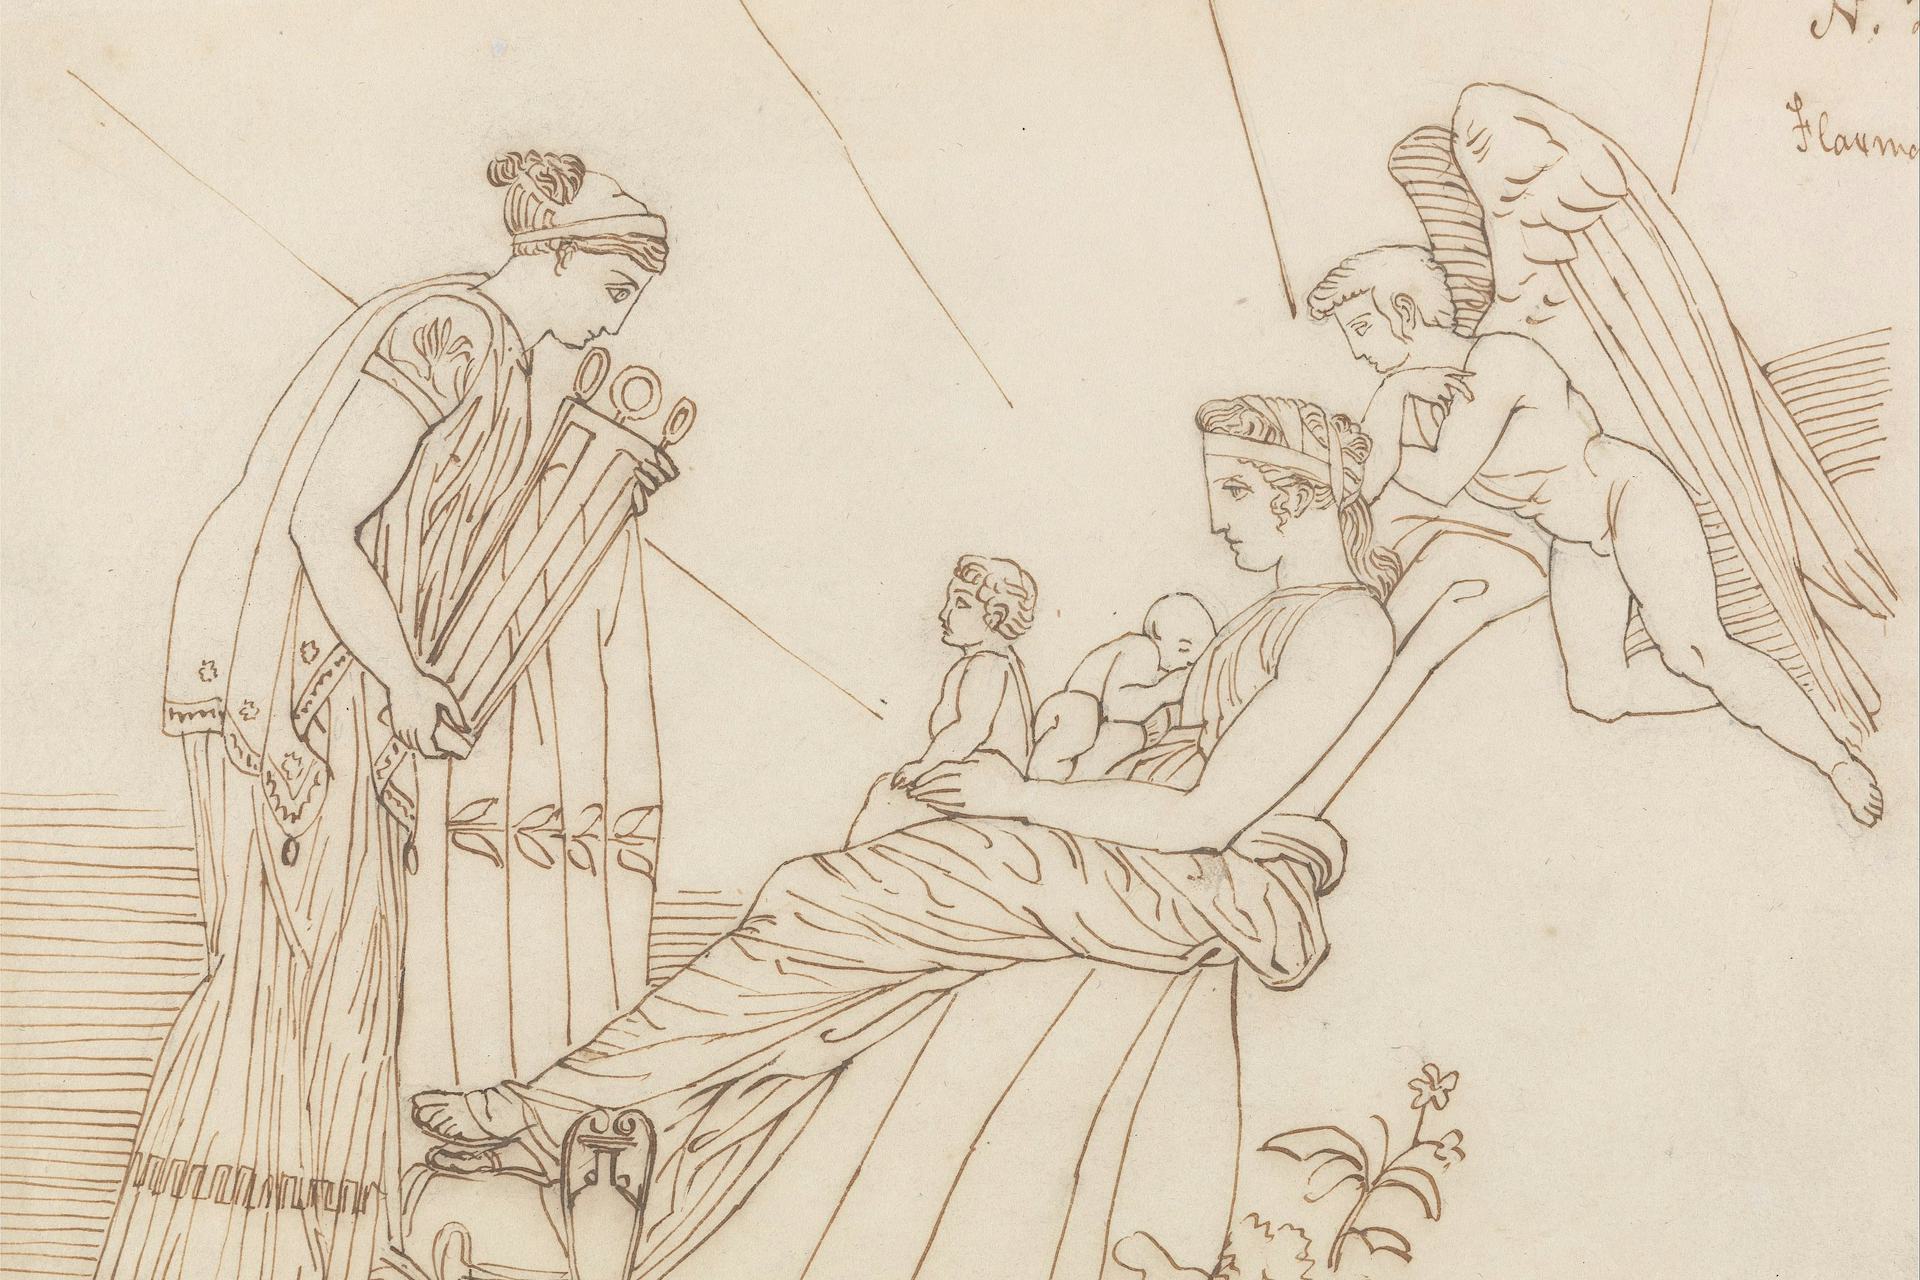 To Phoebus at His Birth, From Aeschylus, Furies by John Flaxman (n.d.)